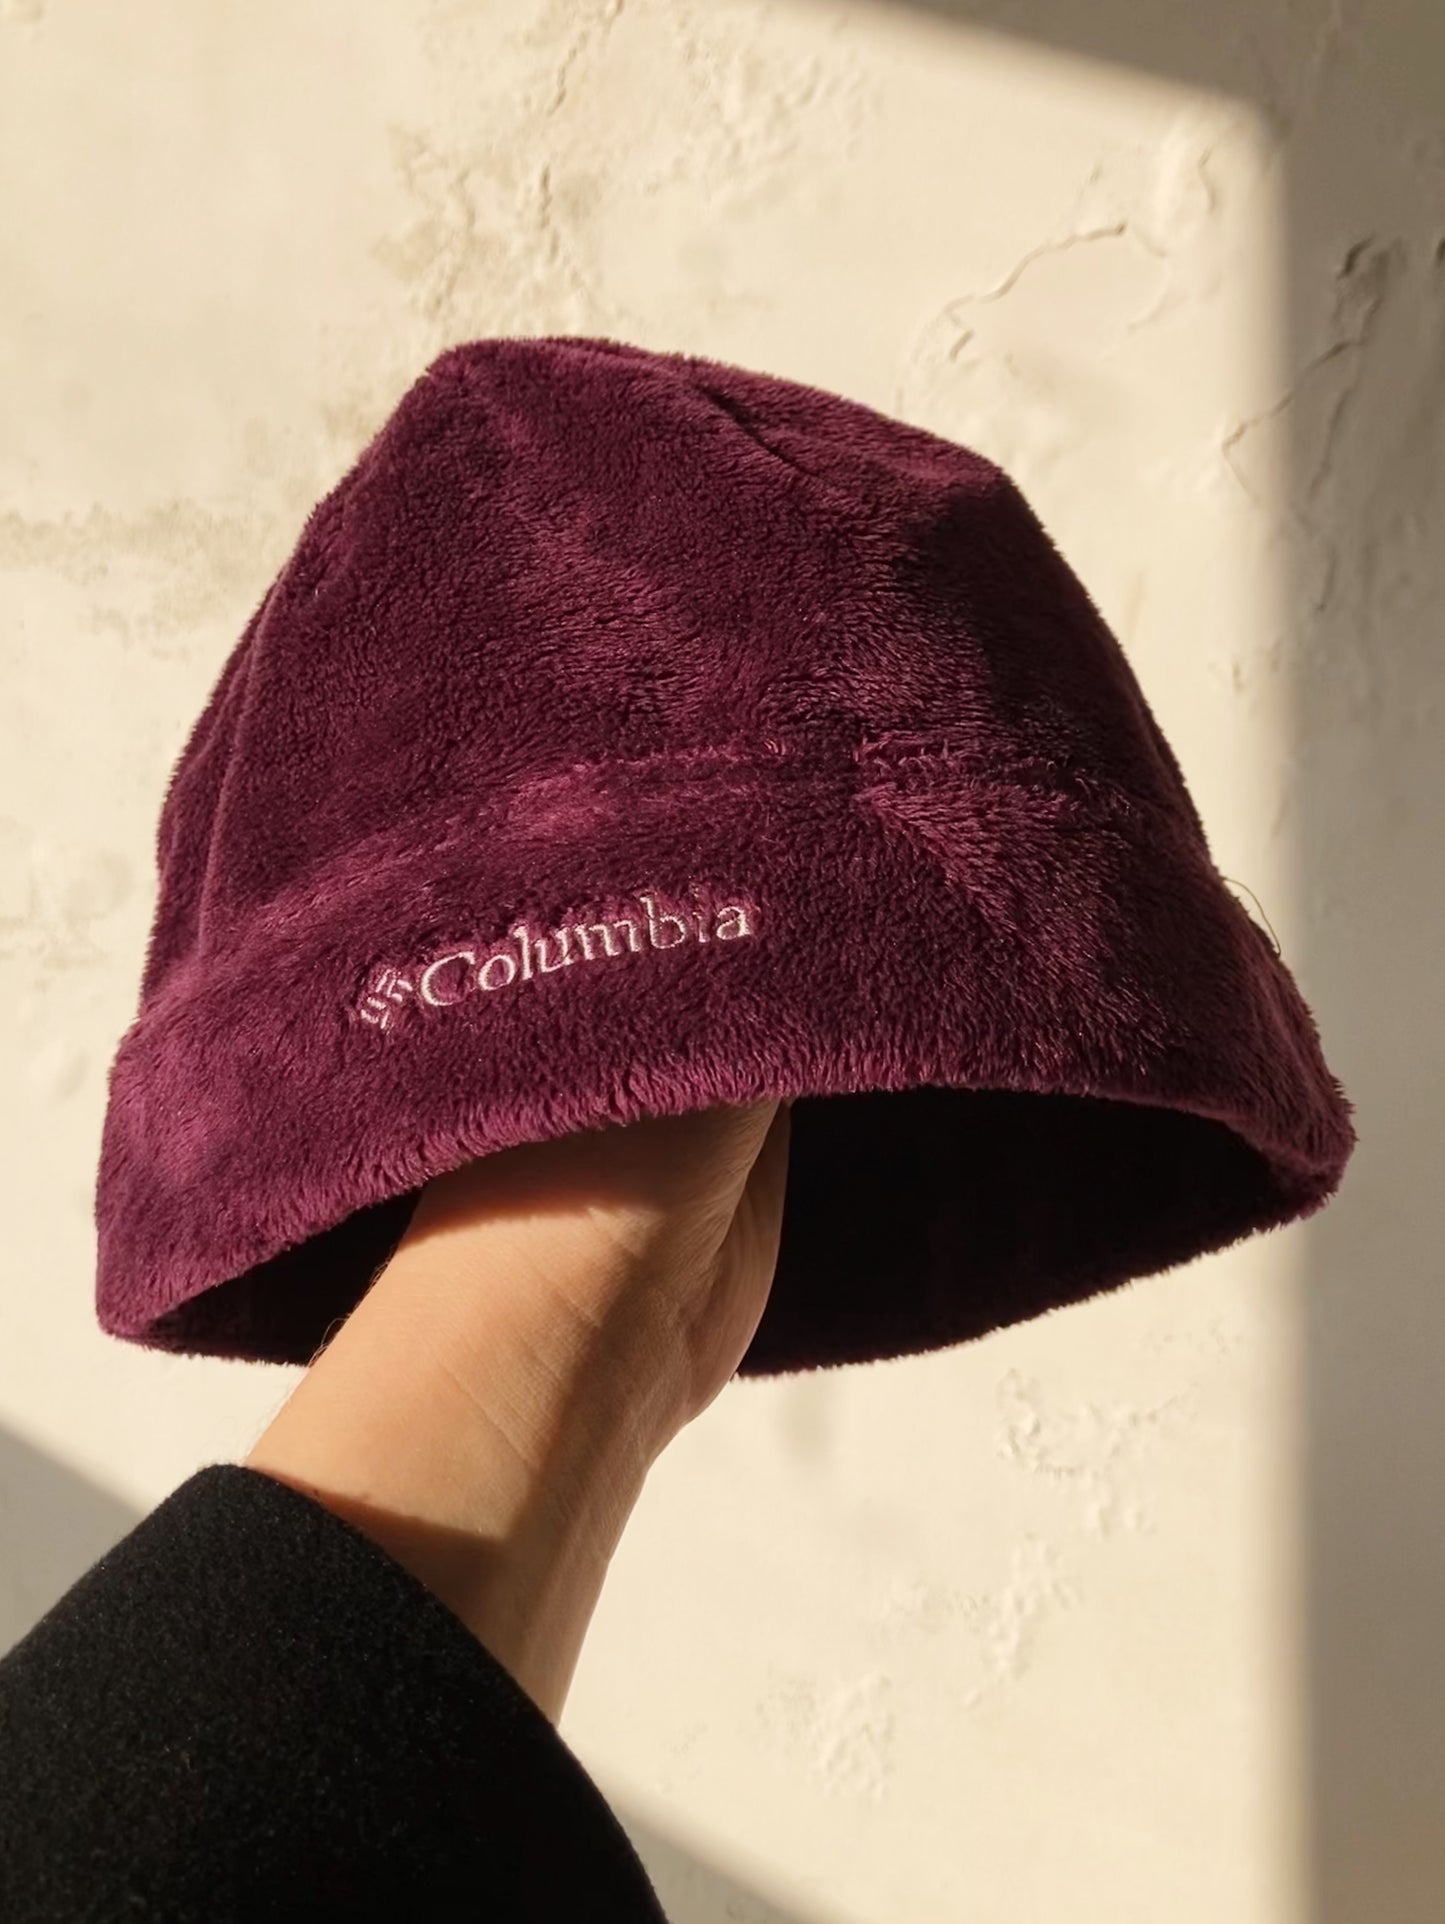 NEW IN! Columbia hat